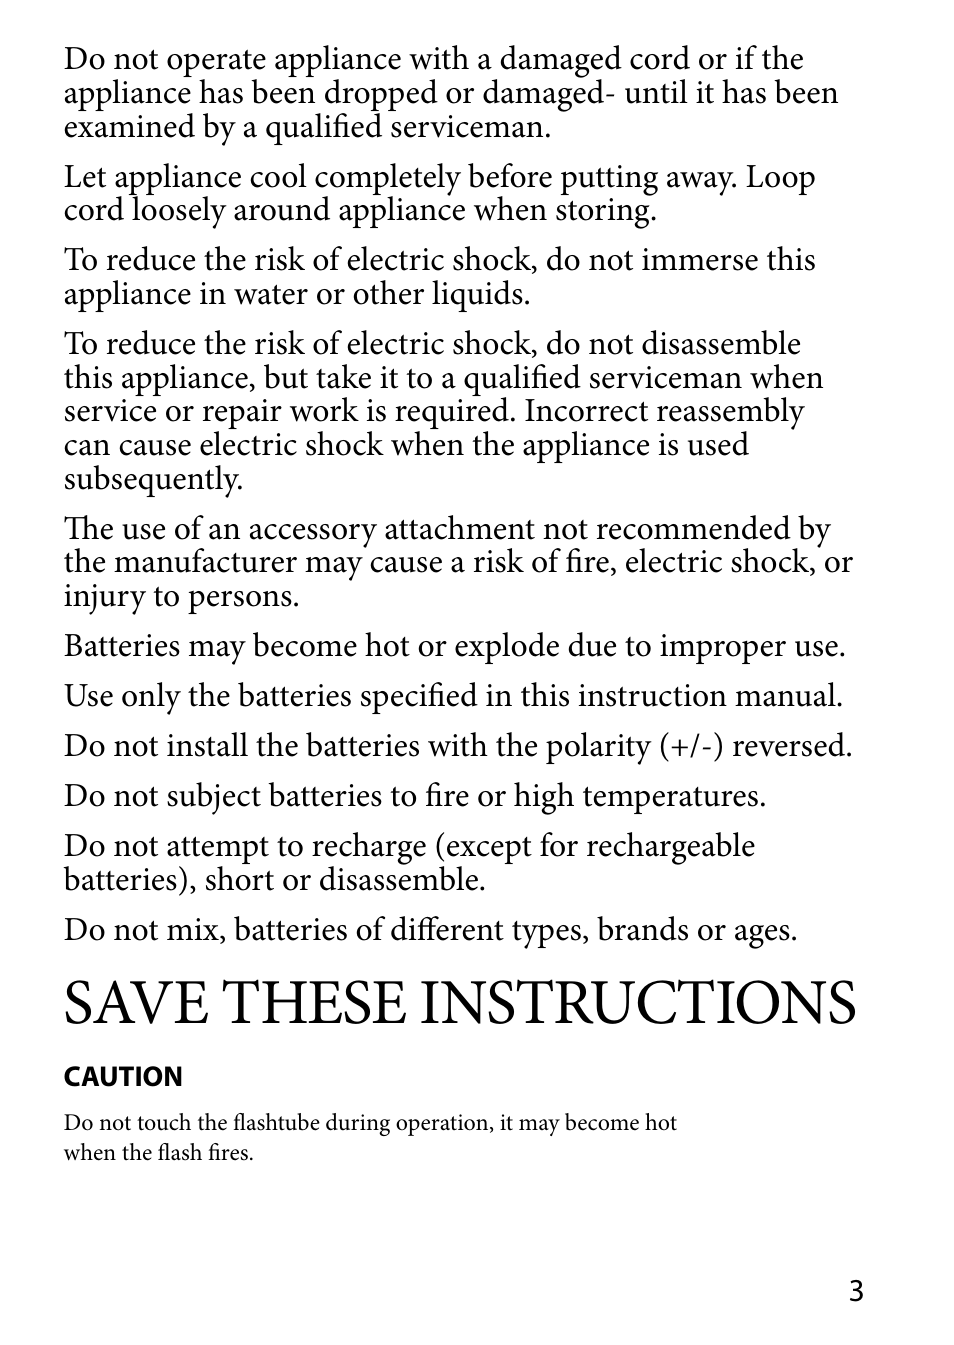 Save these instructions | Sony HVL-MT24AM User Manual | Page 3 / 295